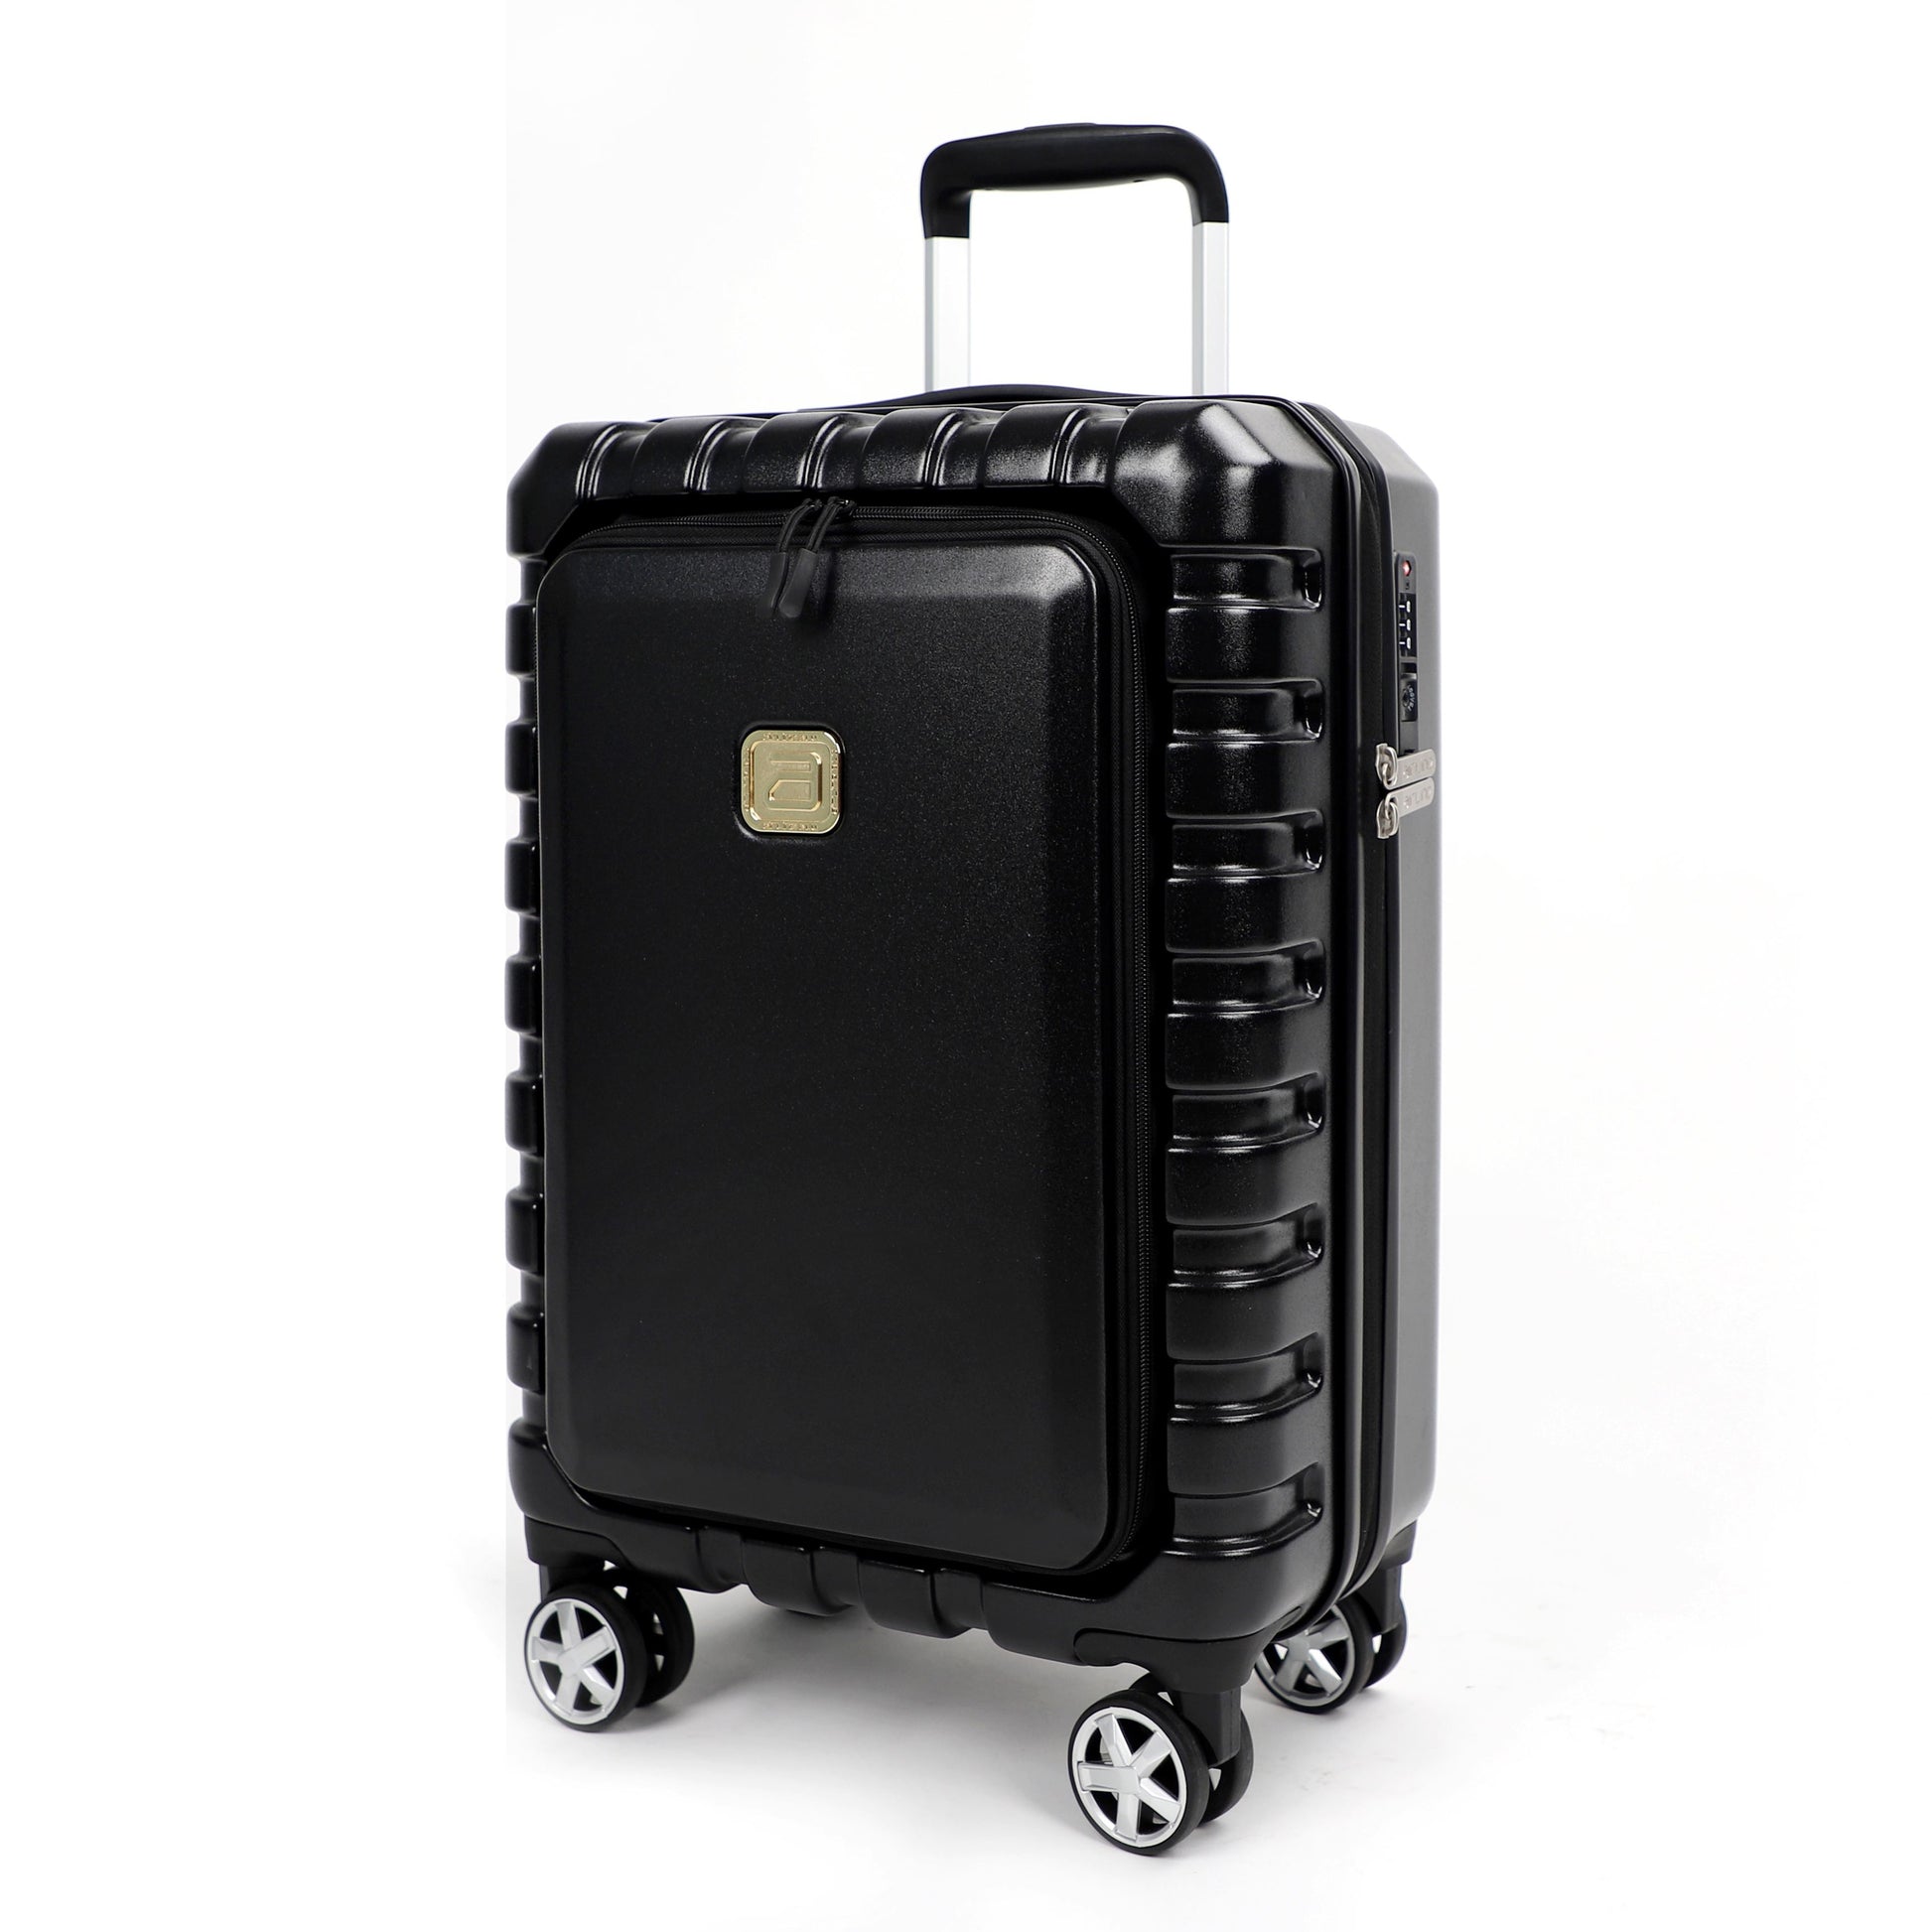 Airline_Carry_On_Luggage_Black_Side_view_T1978155001